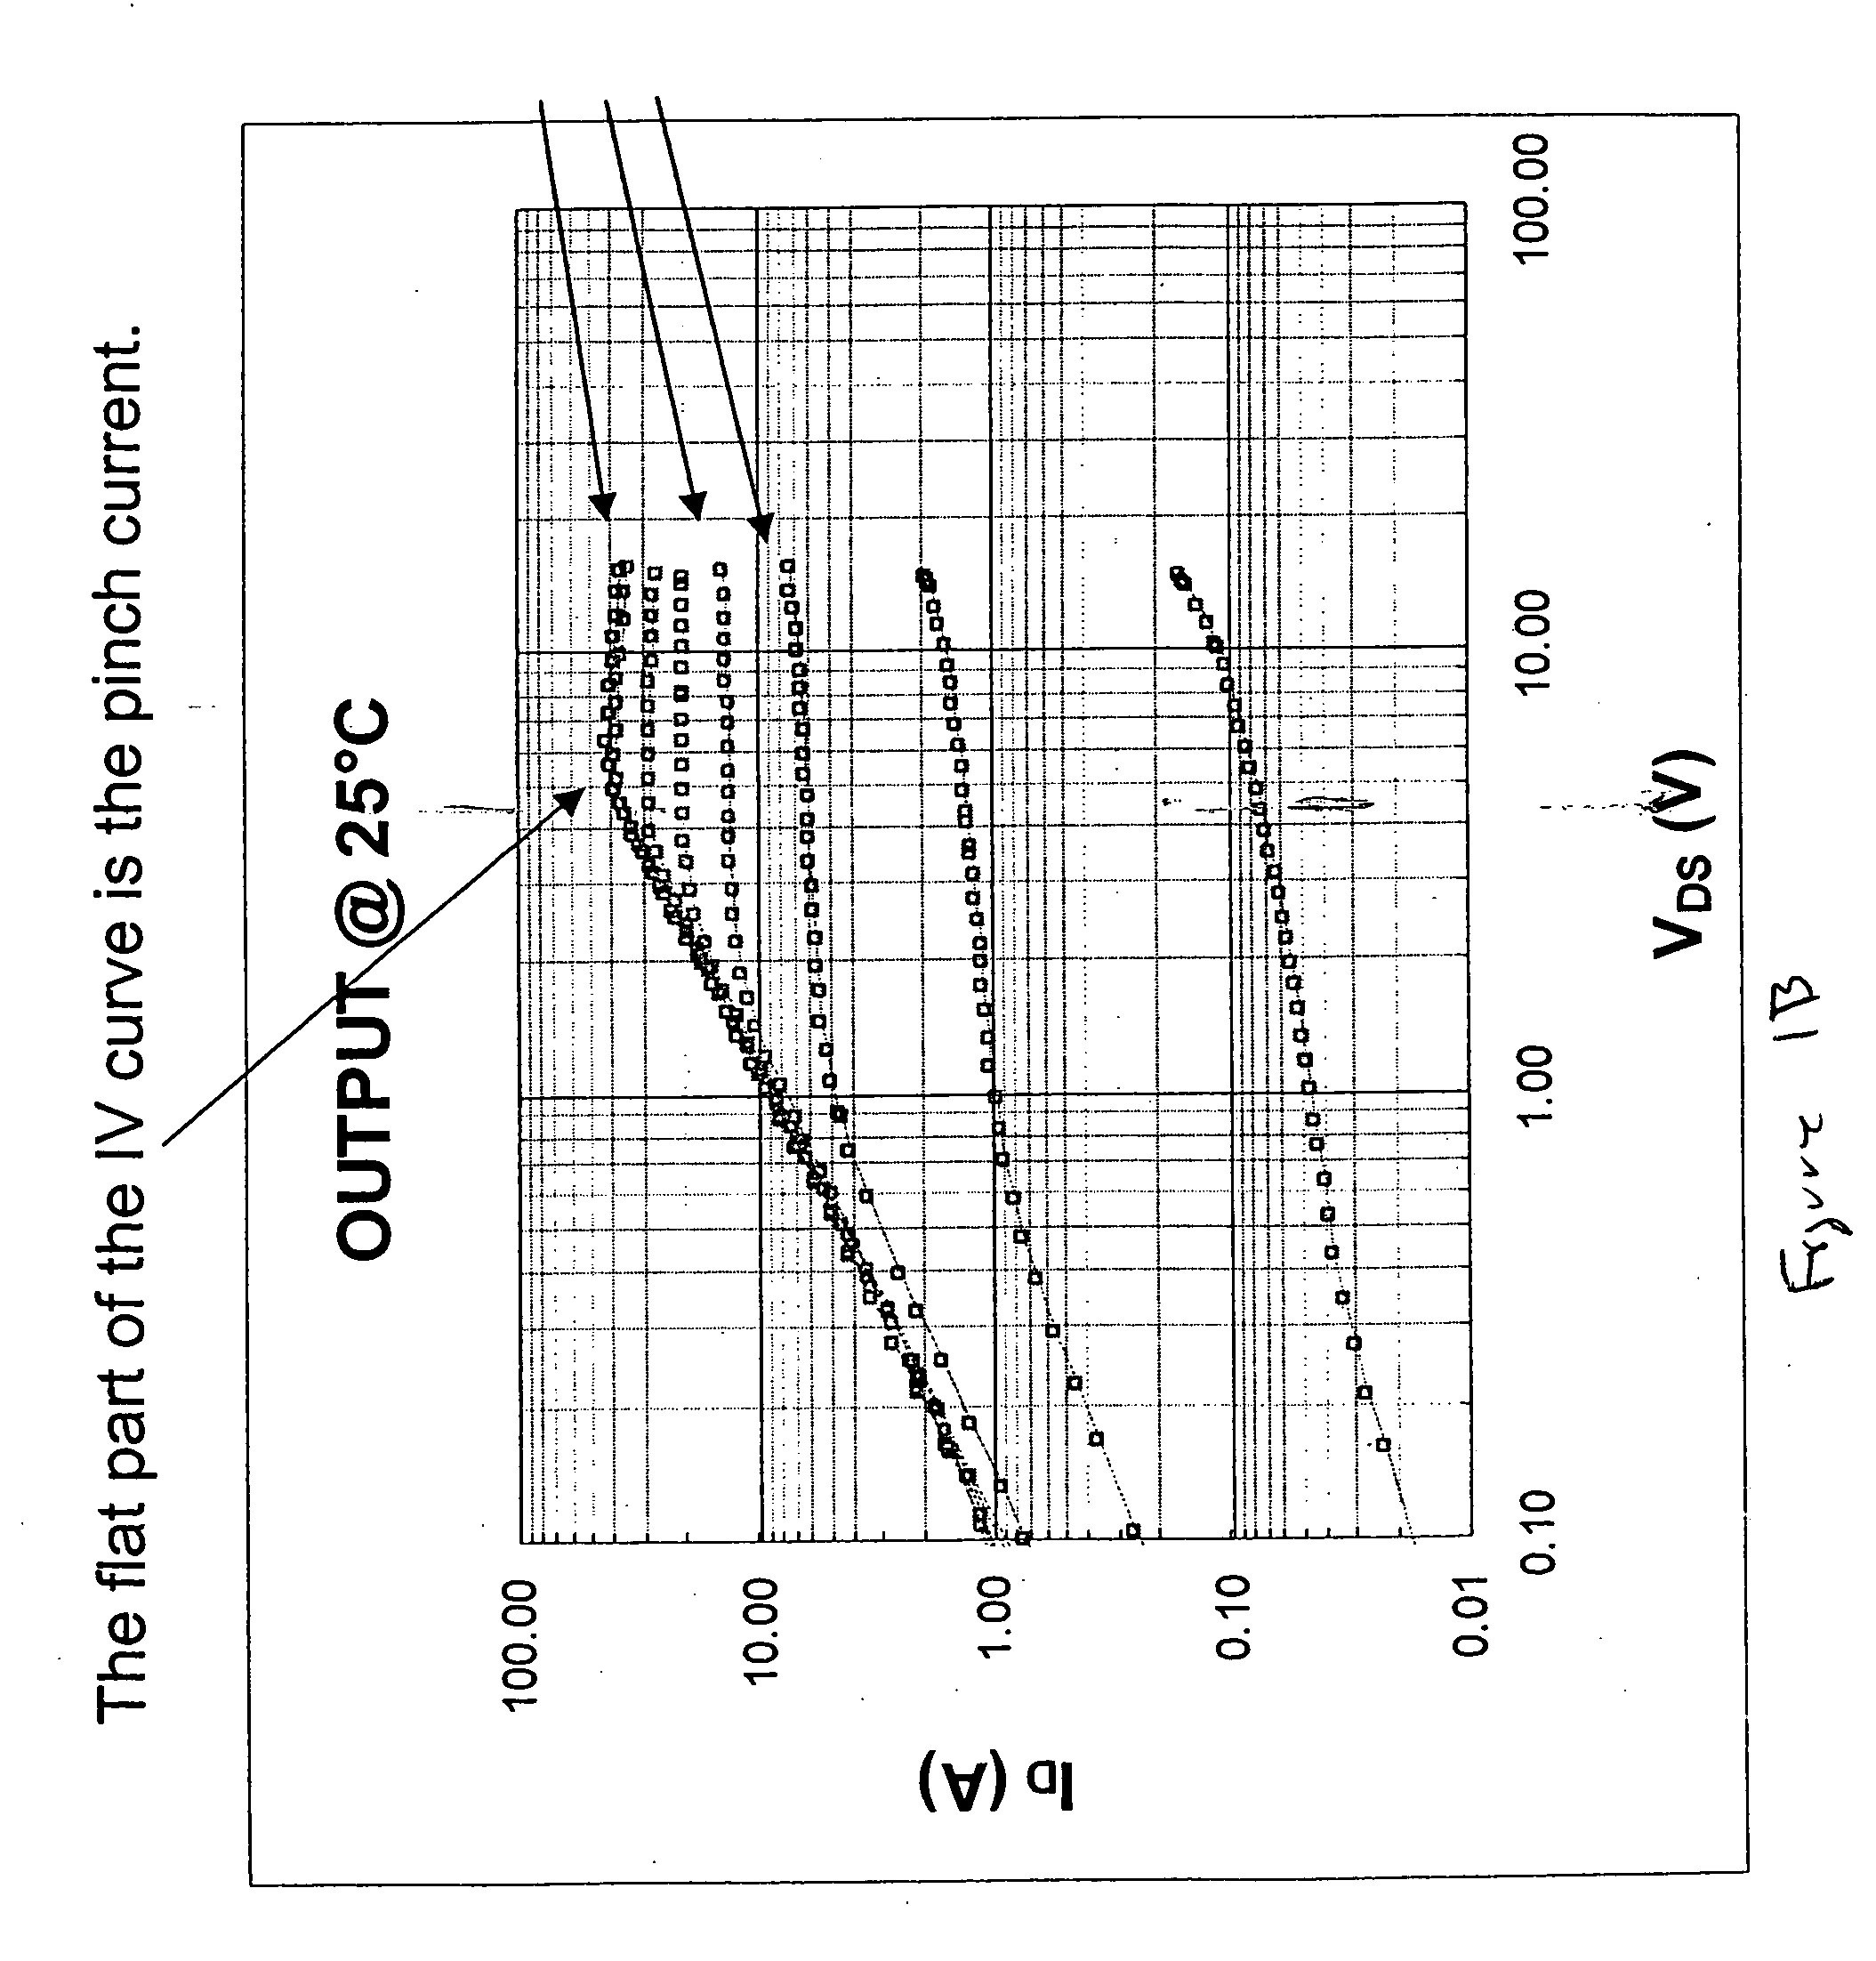 III-Nitride current control device and method of manufacture